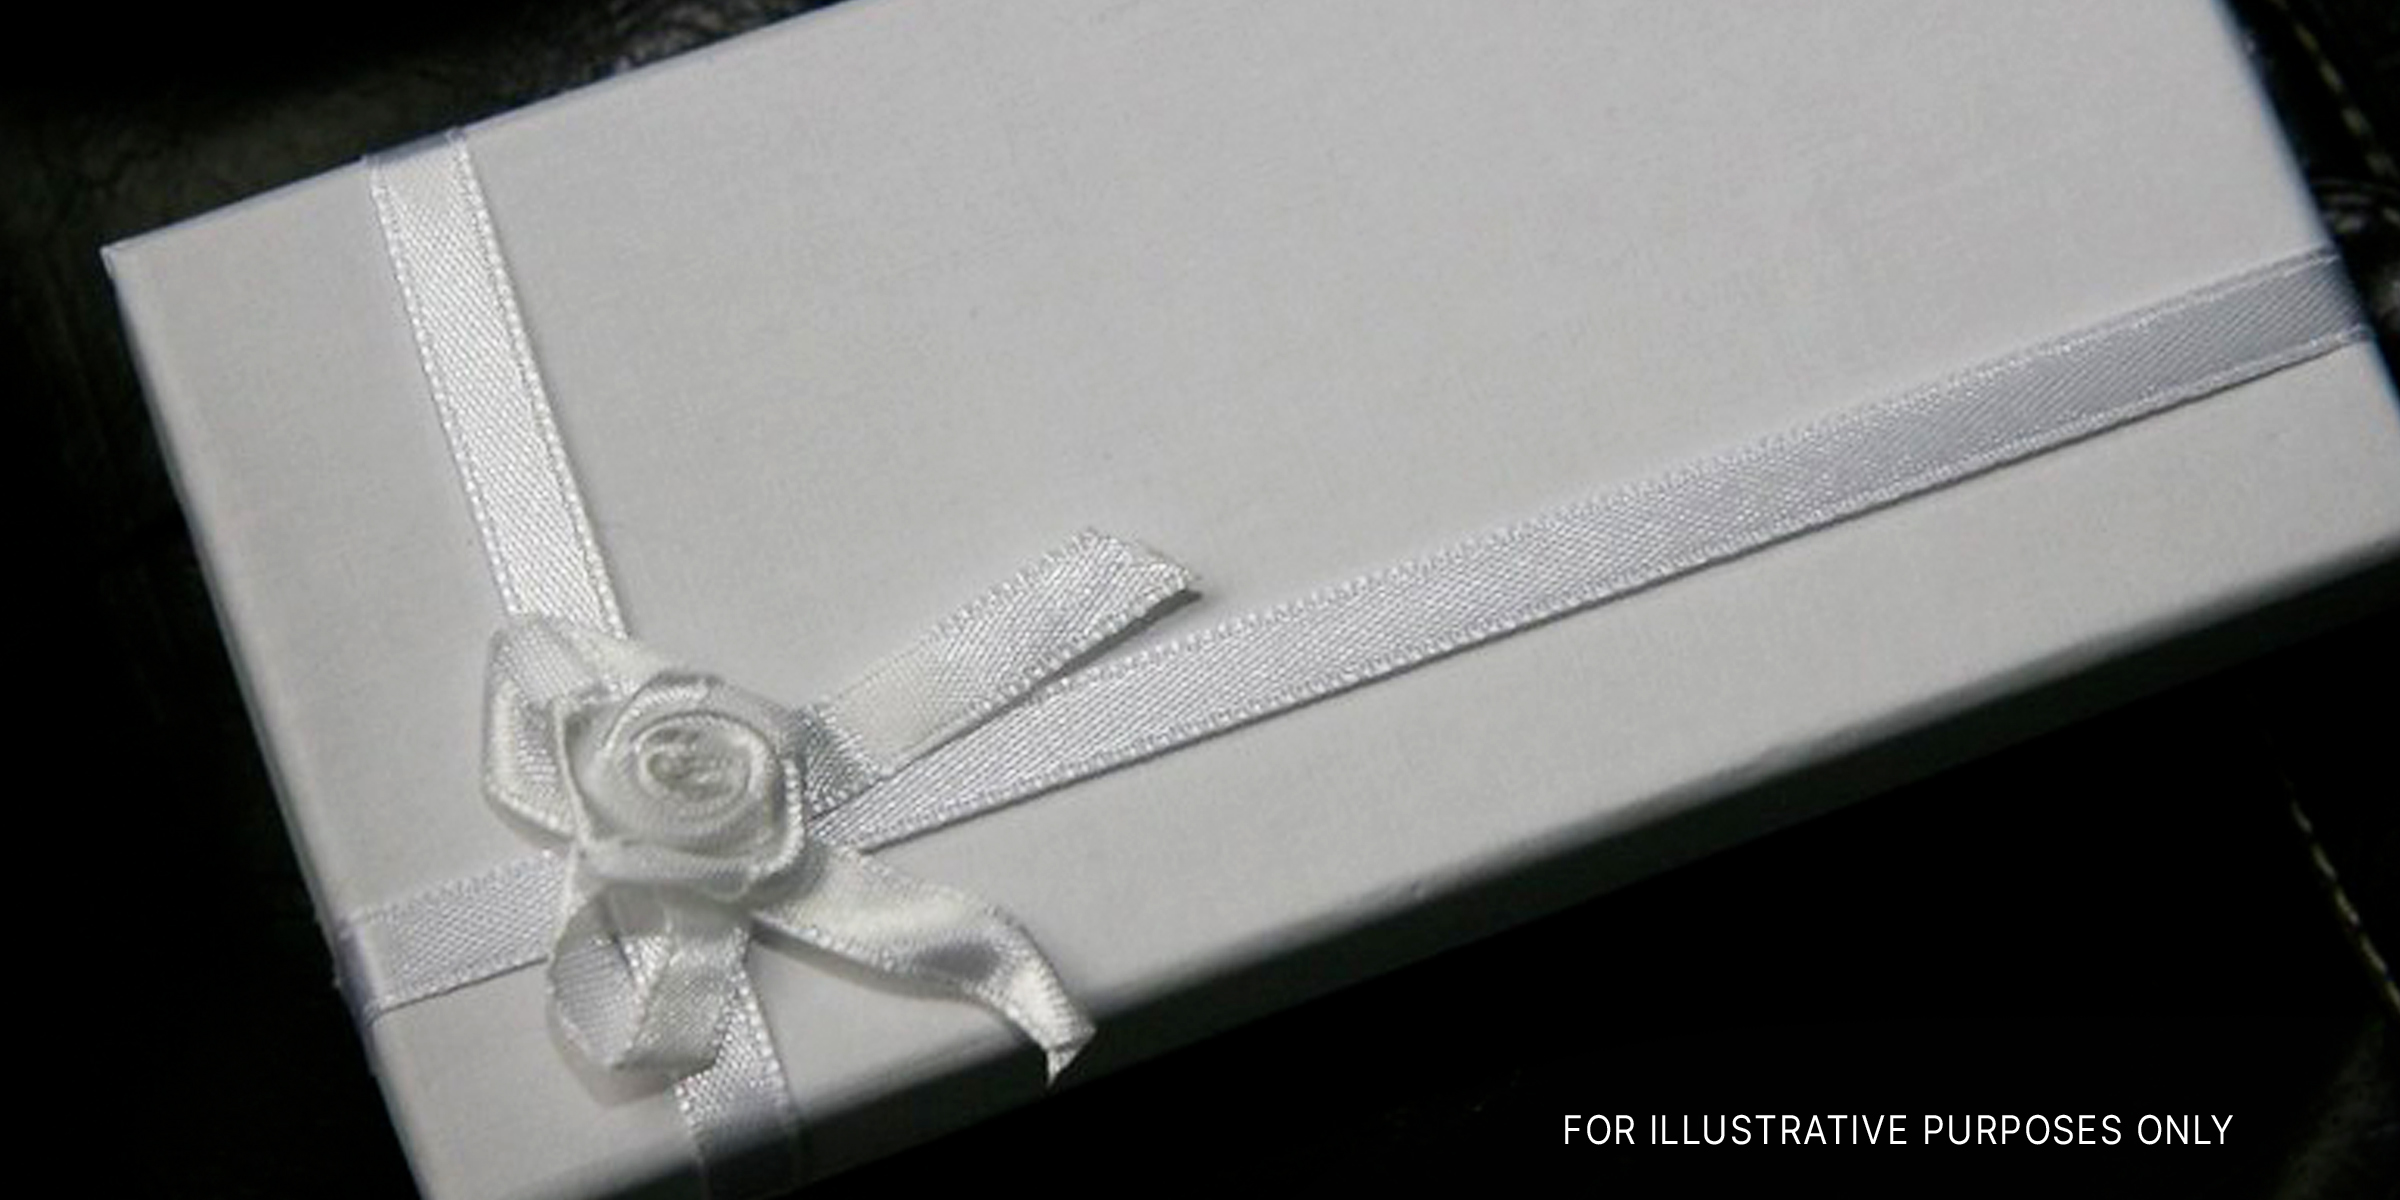 A wrapped gift box | Source: Flickr.com